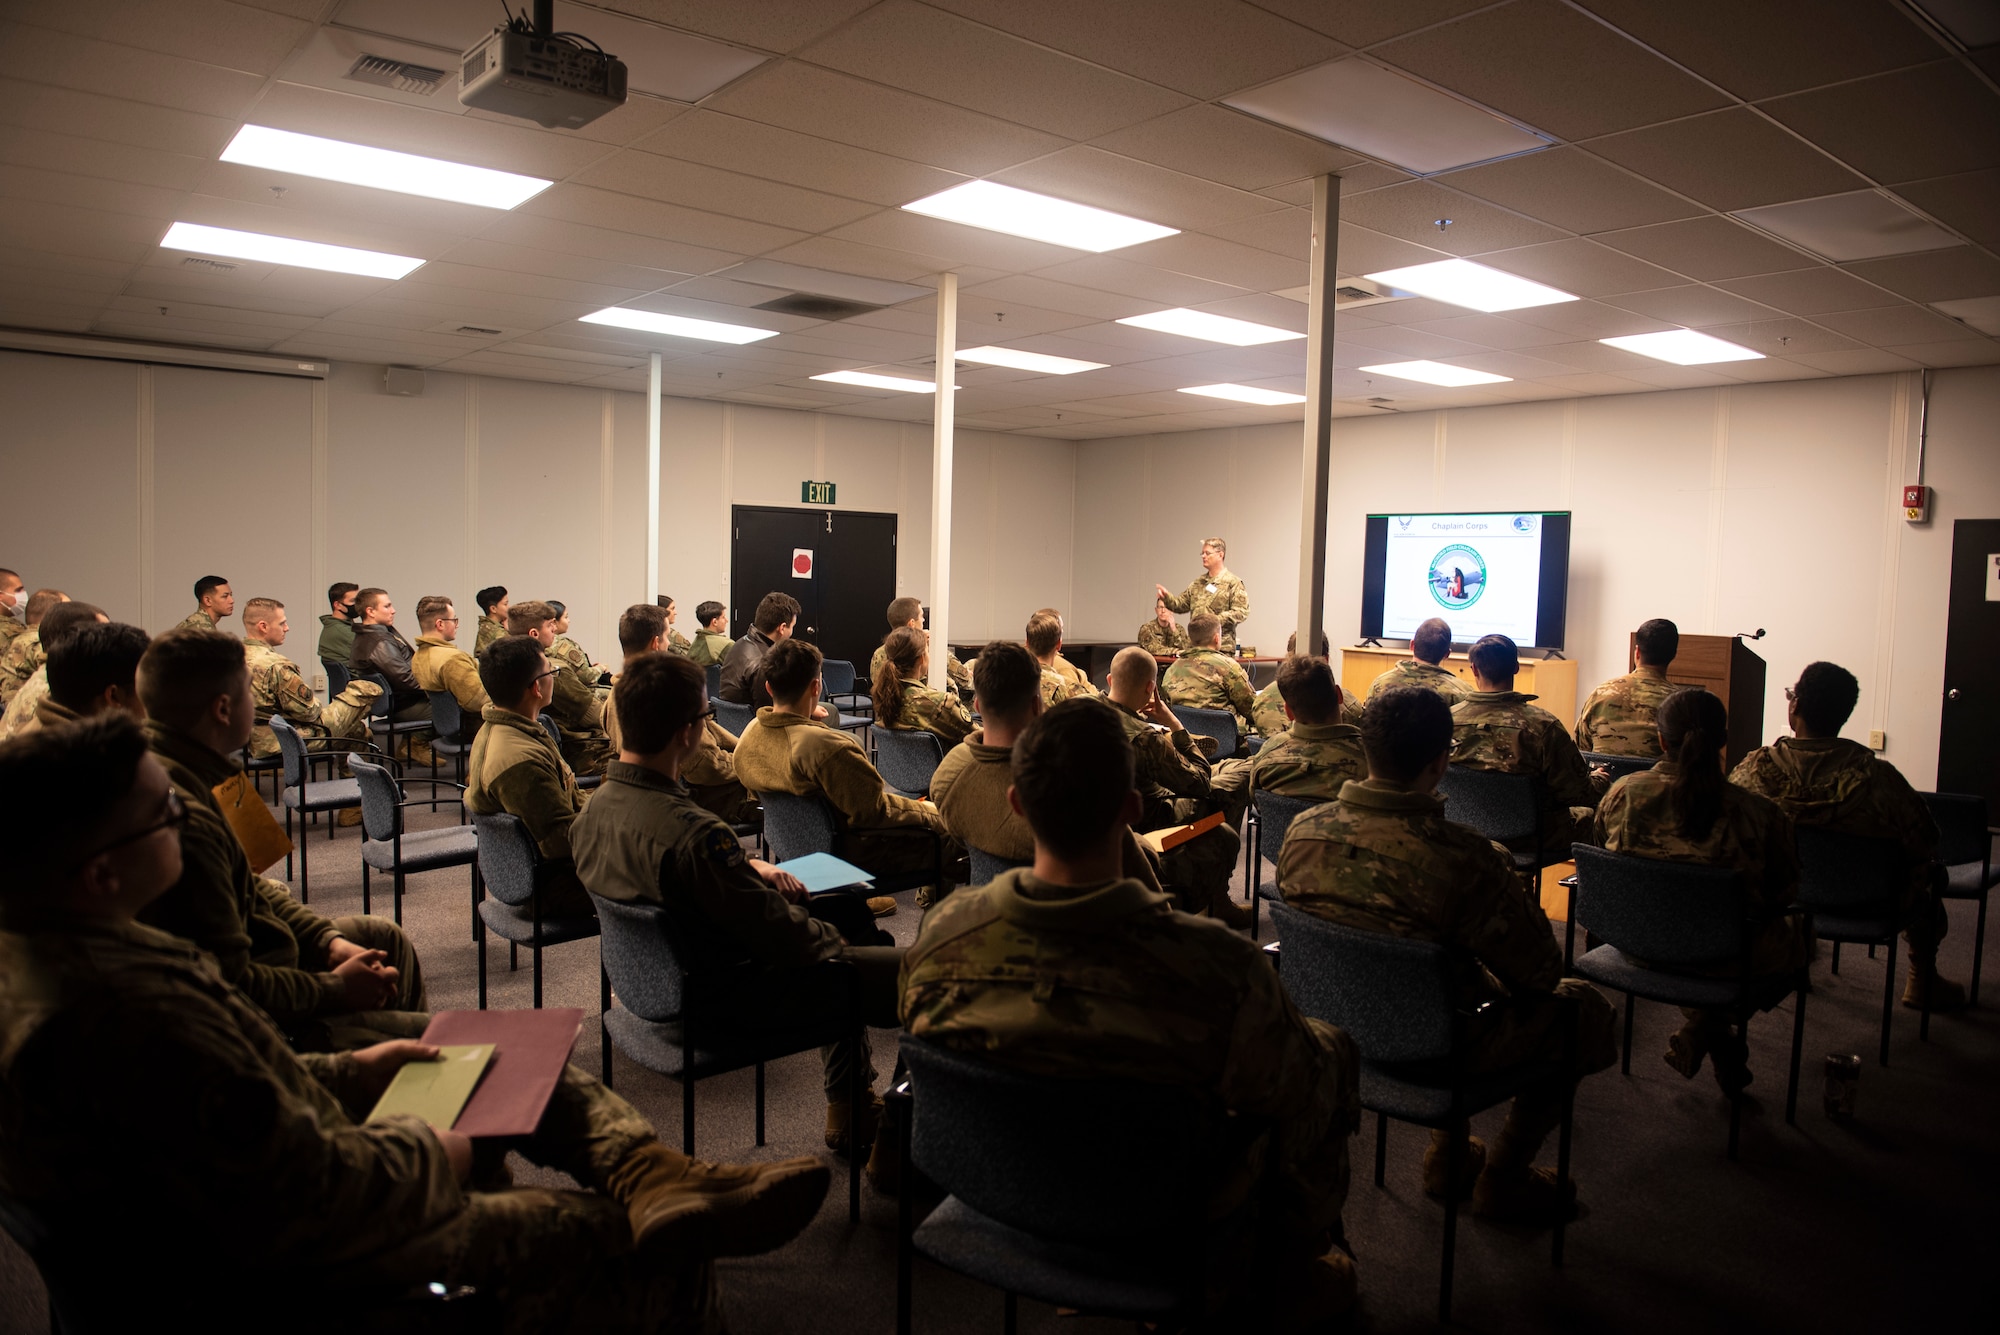 U.S. Air Force Chaplain (Capt.) Timothy Dahl, 627th Air Base Group chaplain, briefs Airmen regarding chaplain services as part of Exercise Rainier War 22A at Joint Base Lewis-McChord, Washington, March 15, 2022. Rainier War 22A exercised and evaluated the wing’s ability to employ the force and its  ability to perform during wartime and/or contingency taskings in a high-intensity, wartime contested, degraded and operationally limited environment while supporting the contingency operations against a near-peer adversary. (U.S. Air Force photo by Master Sgt. Julius Delos Reyes)